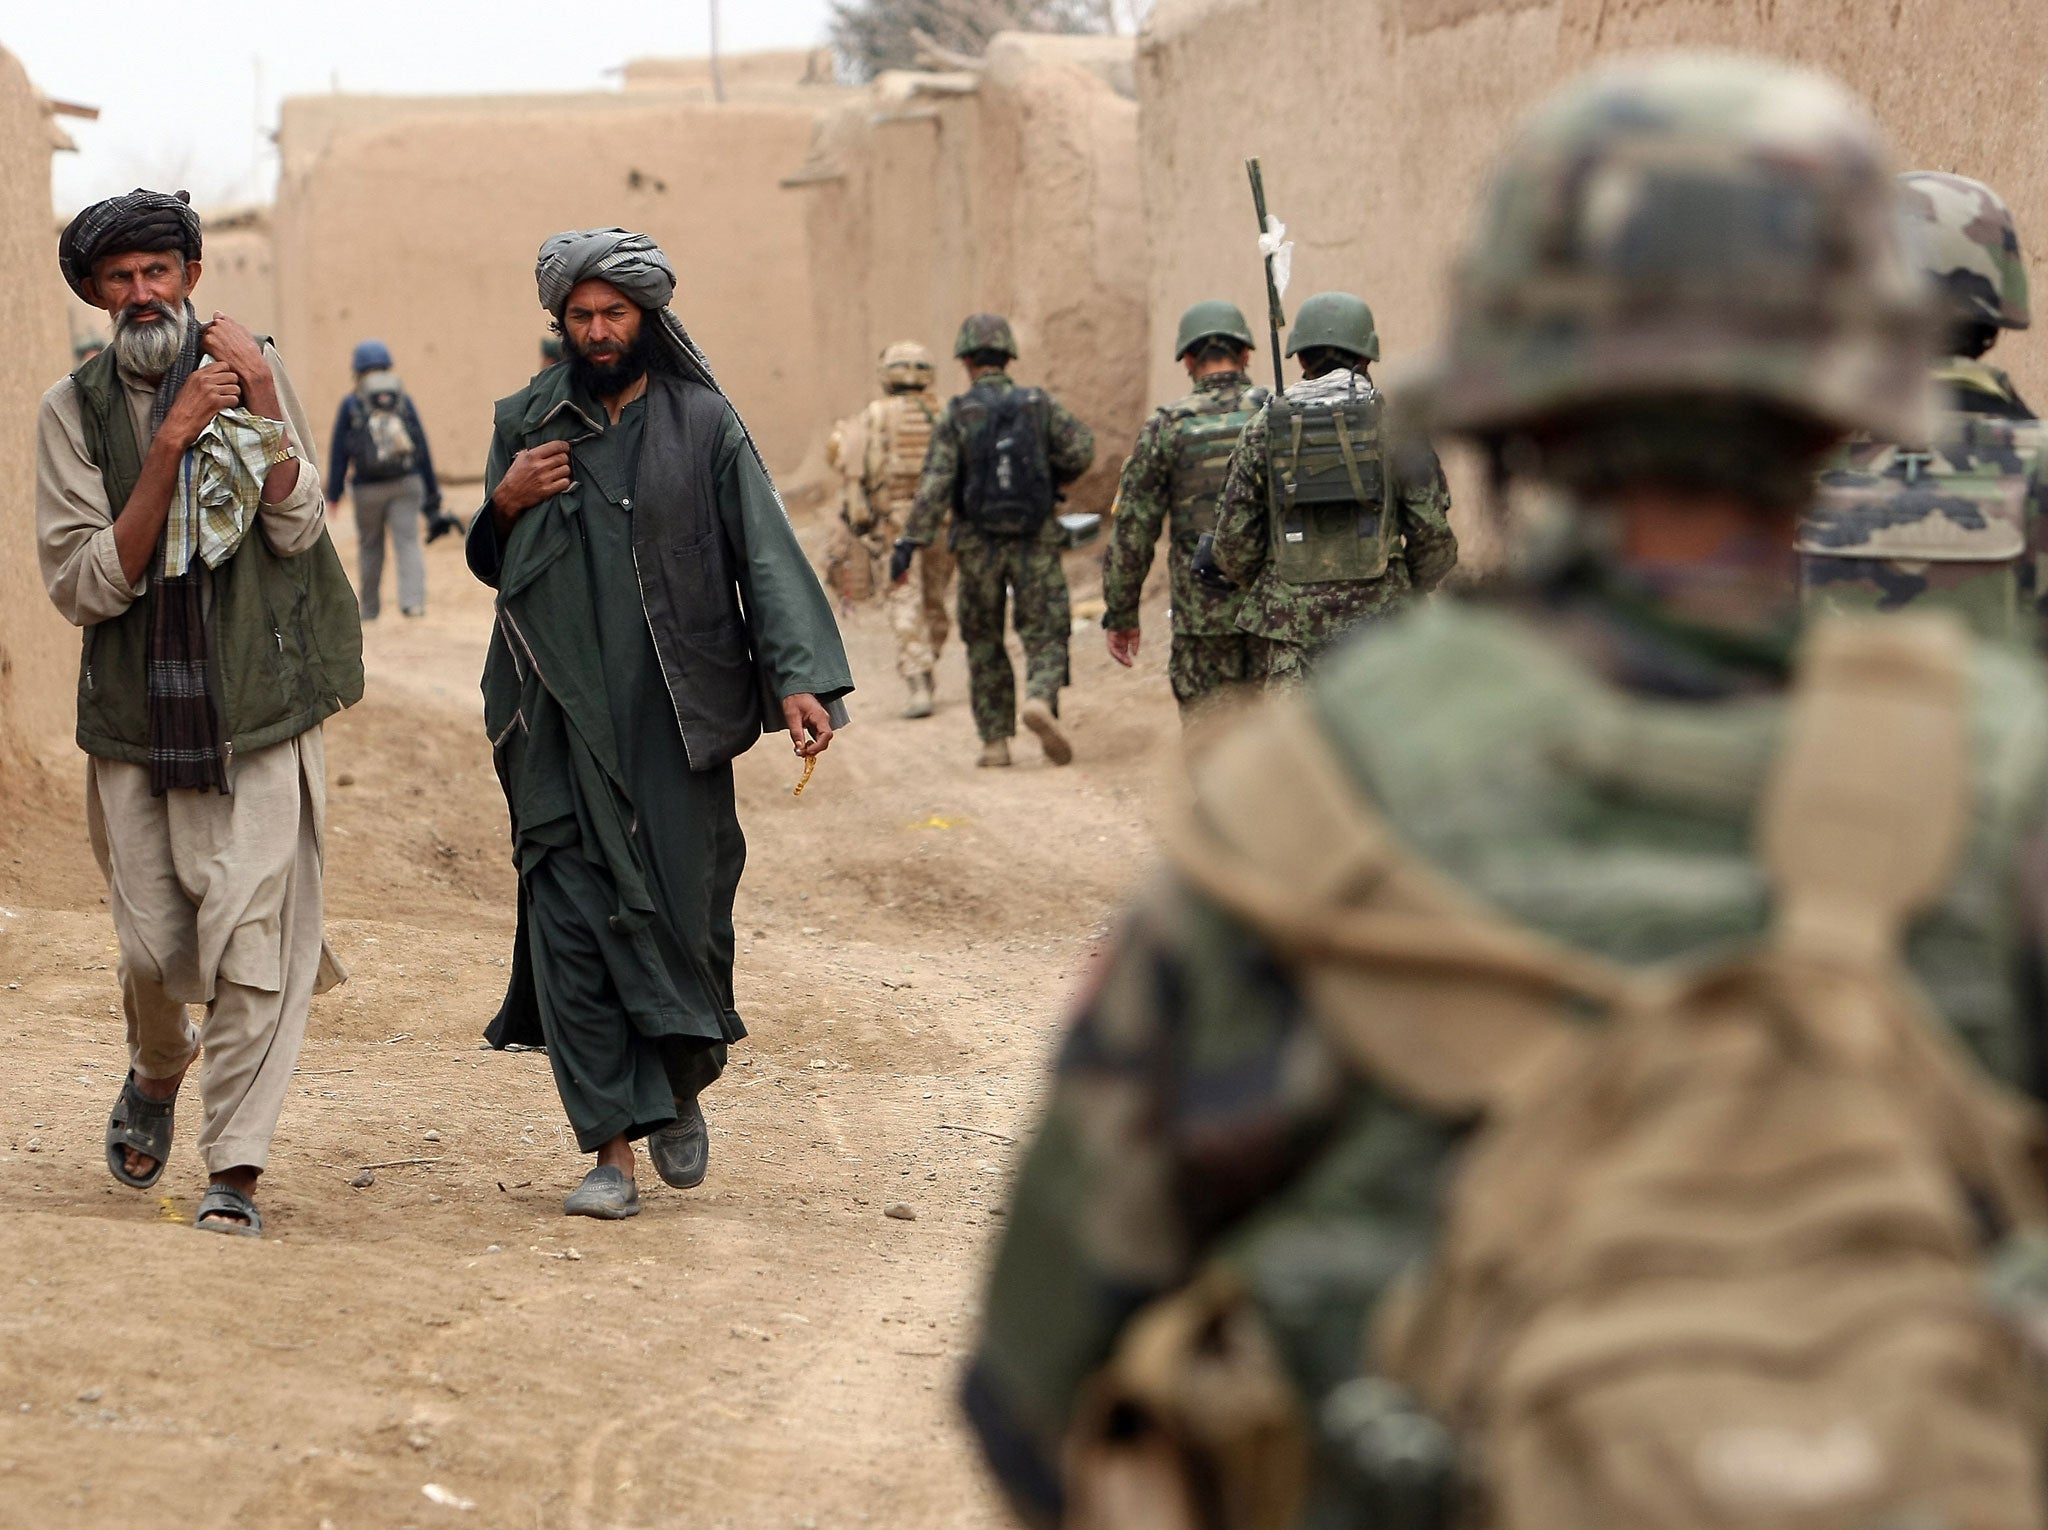 Afghan men walk past a patrol conducted by British soldiers of the 1st batallion of the Royal Welsh, French soldiers of the 21st RIMA and Afghan soldiers in a street of the city of Showal in Nad-e-Ali district, Southern Afghanistan, in Helmand province on February 25, 2010.